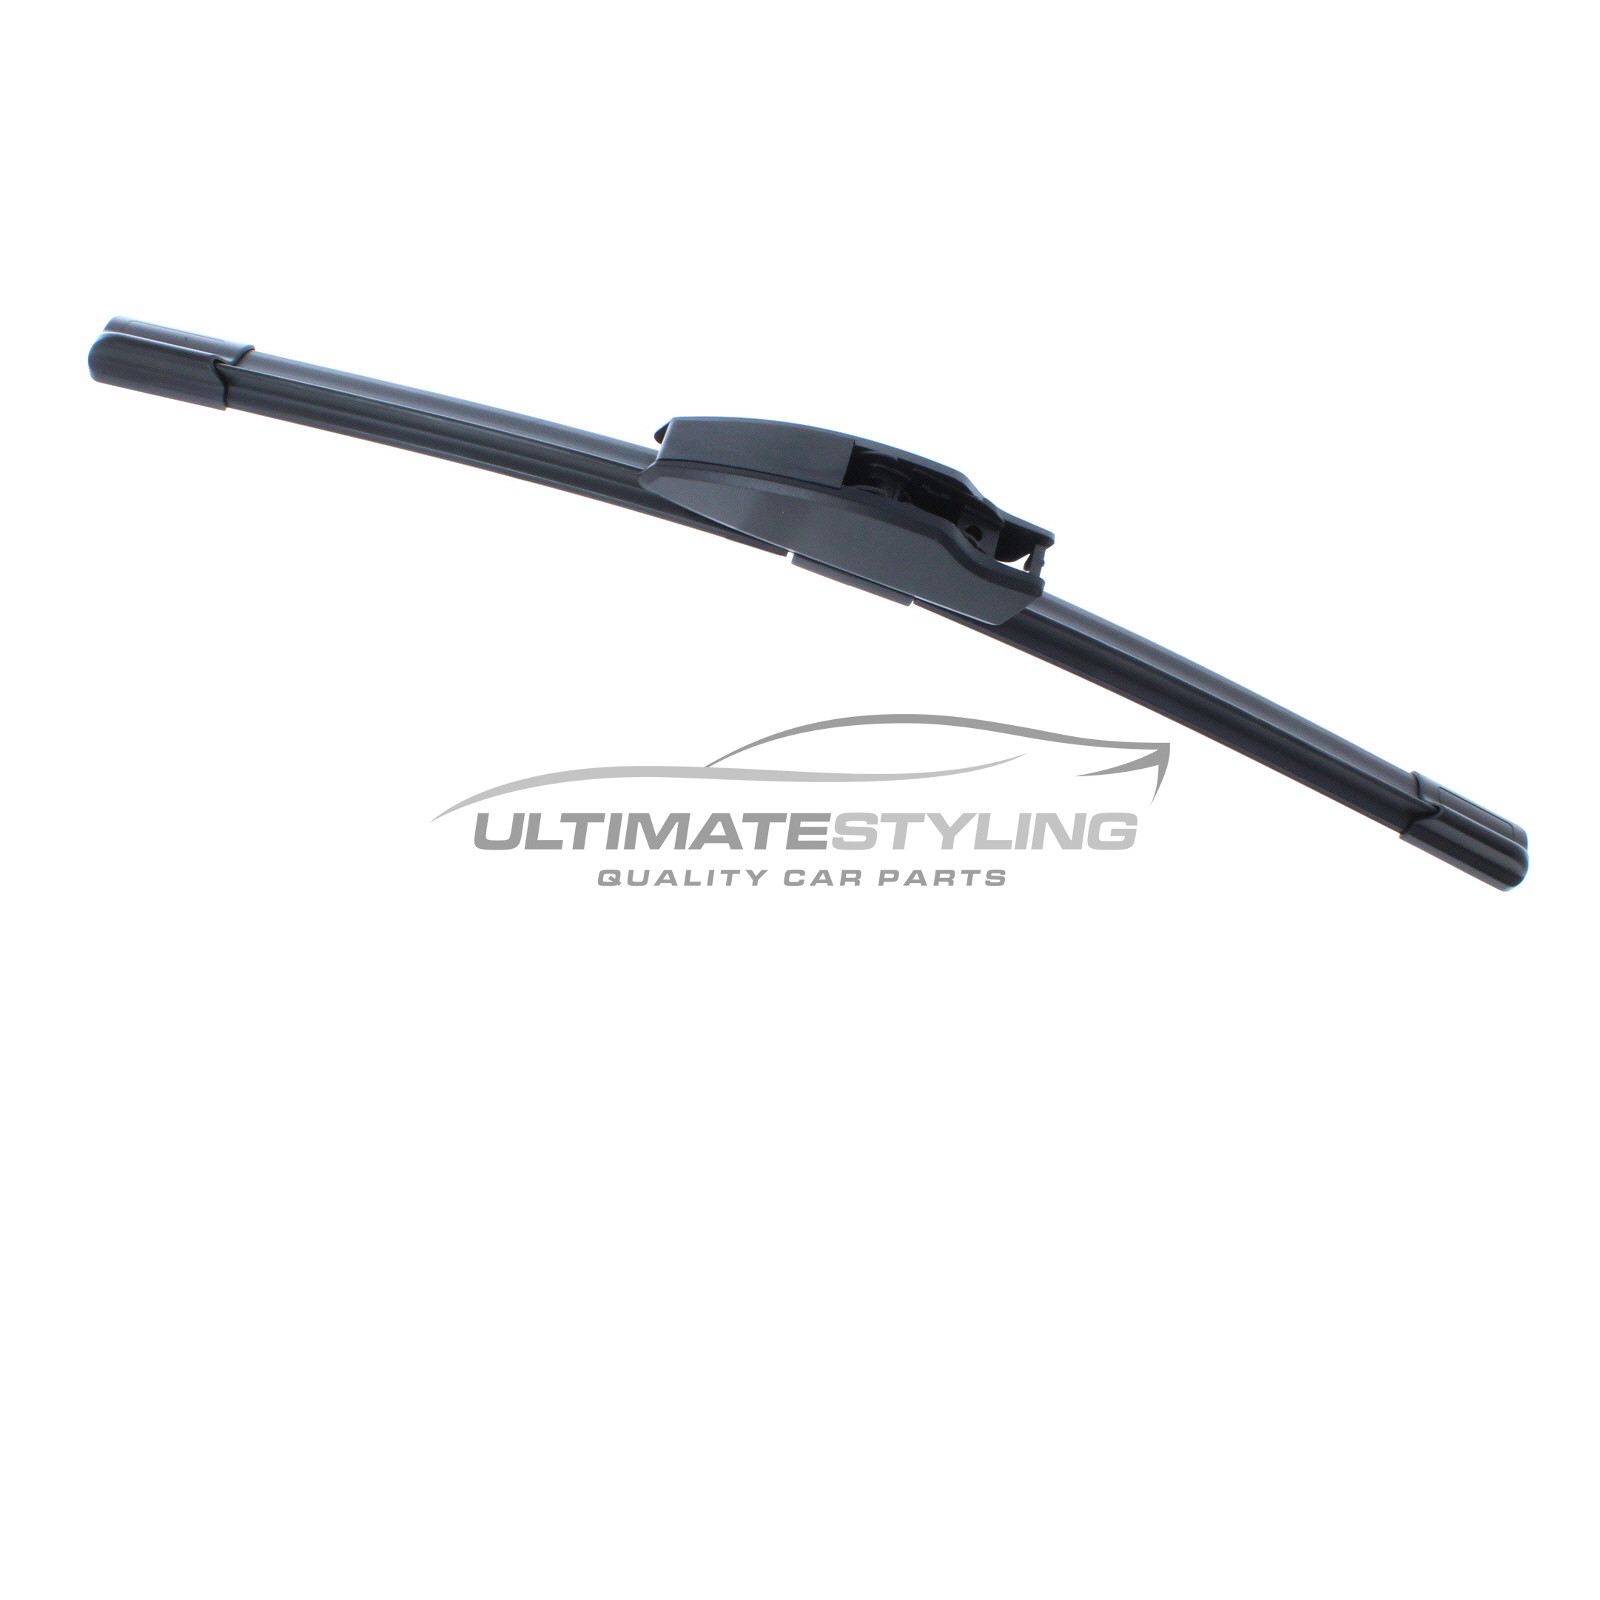 Rear Wiper Blade for Vauxhall Astra